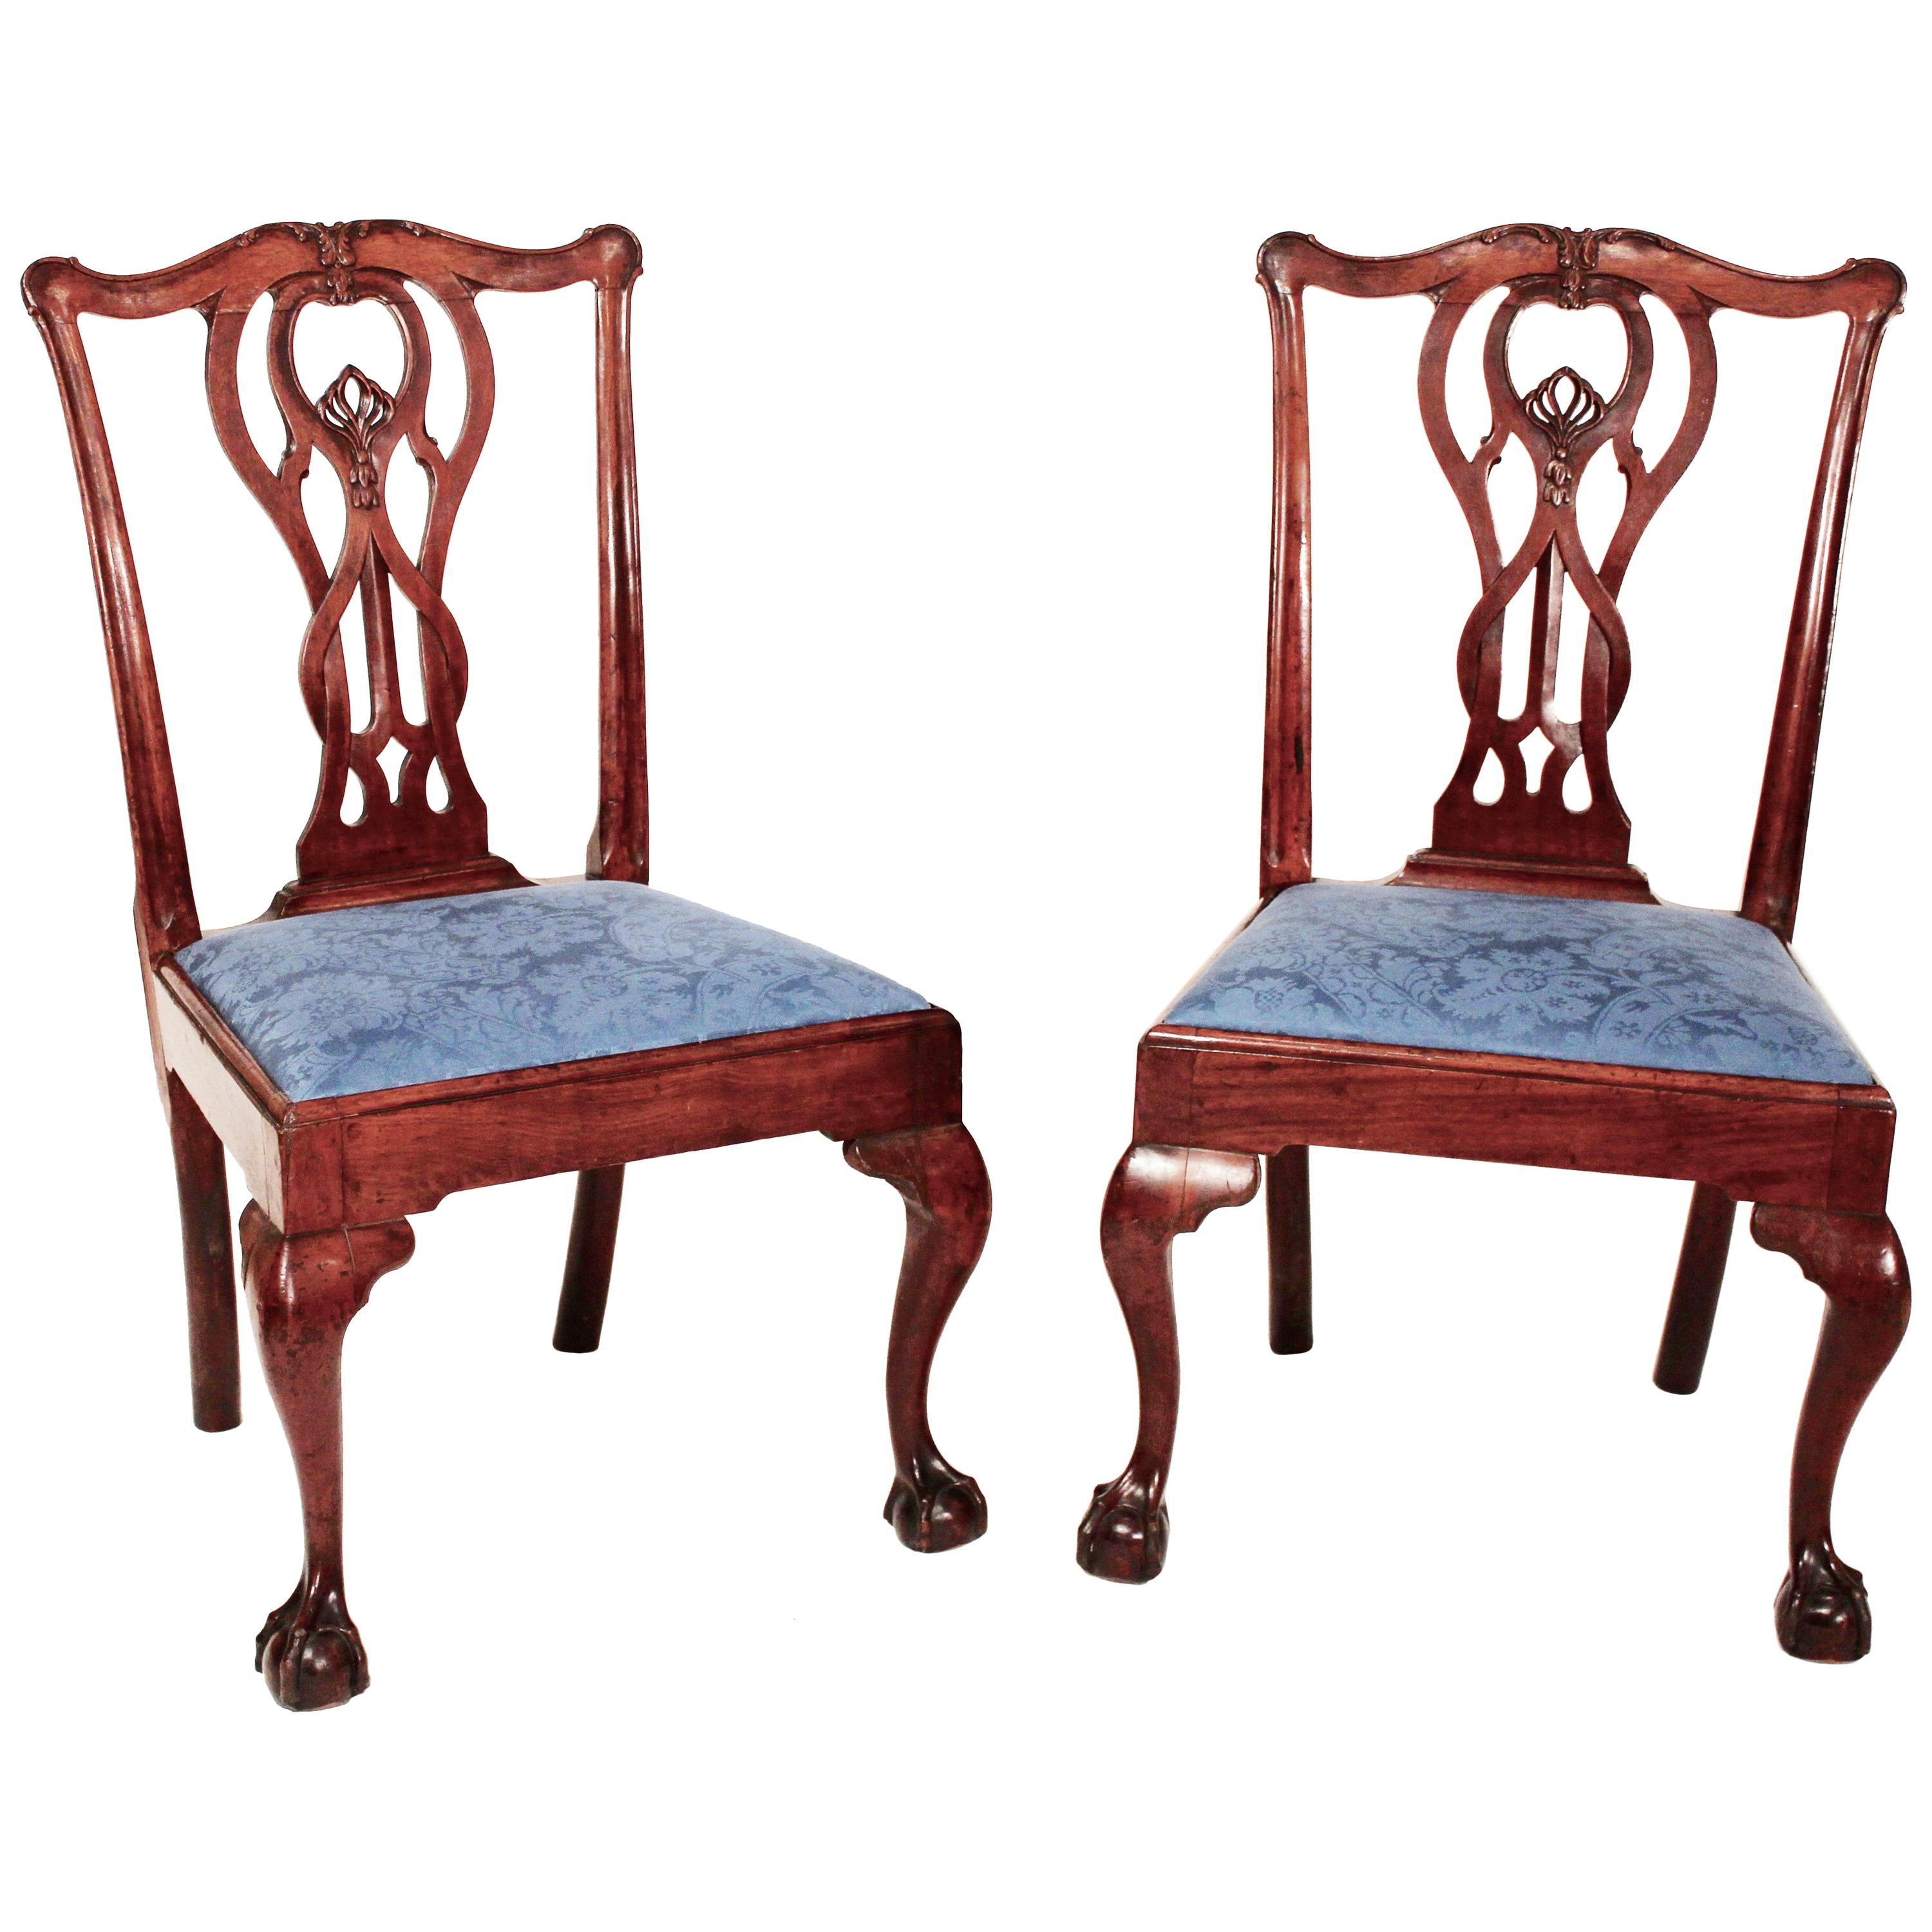 Pair of 18th Century Baltimore Mahogany Chippendale Side Chairs